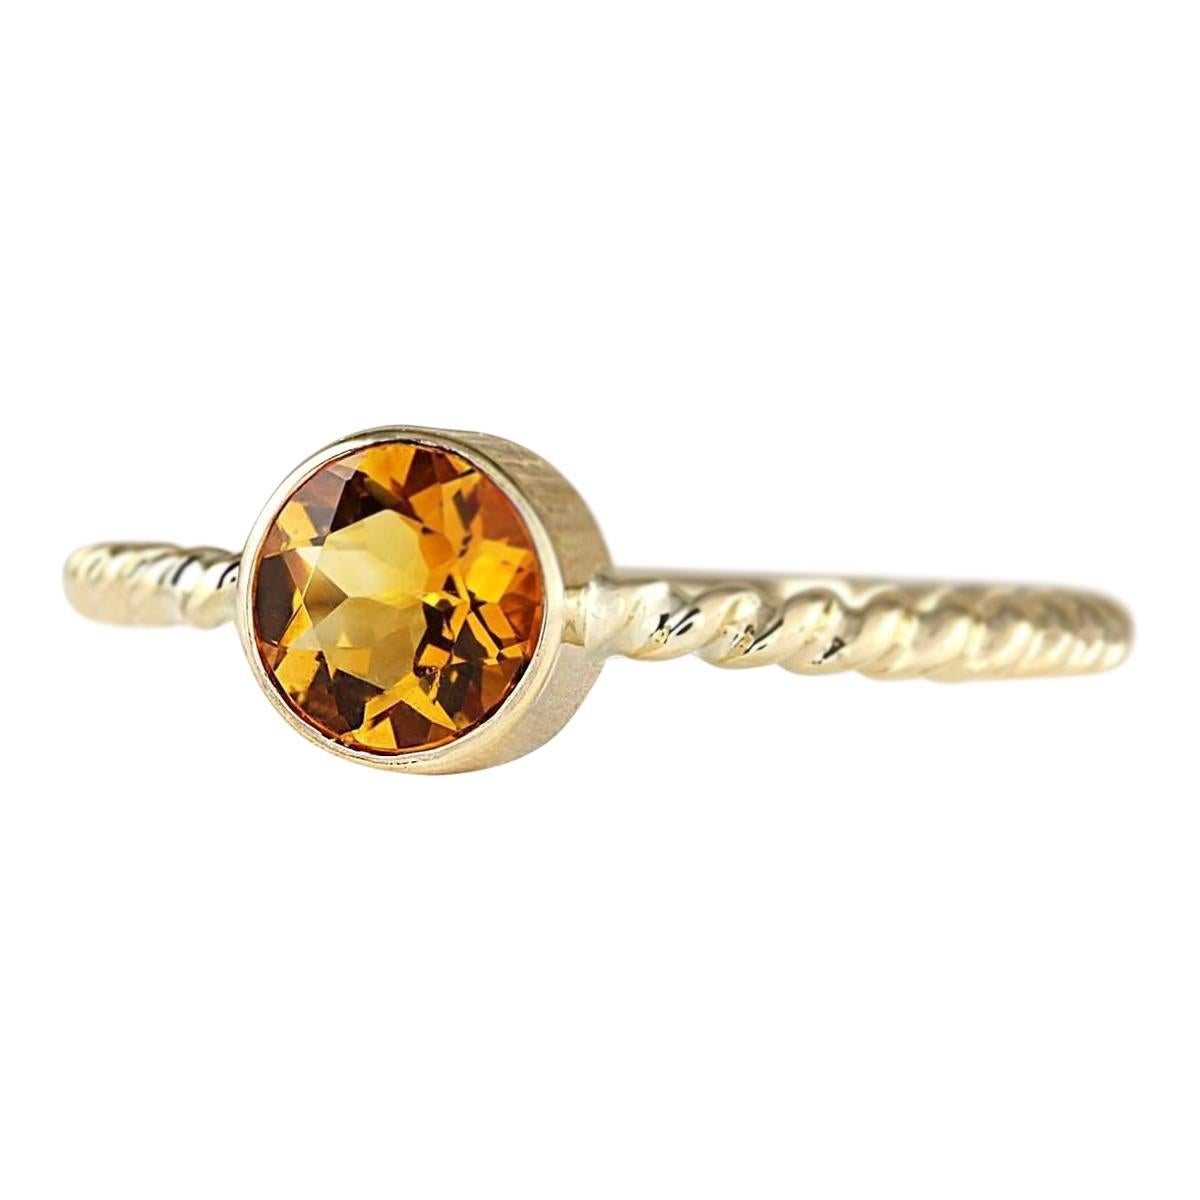 Stamped: 14K Yellow Gold
Total Ring Weight: 2.2 Grams
Total Natural Citrine Weight is 1.00 Carat
Color: Orange
Face Measures: 6.00x6.00 mm
Sku: [703224W]